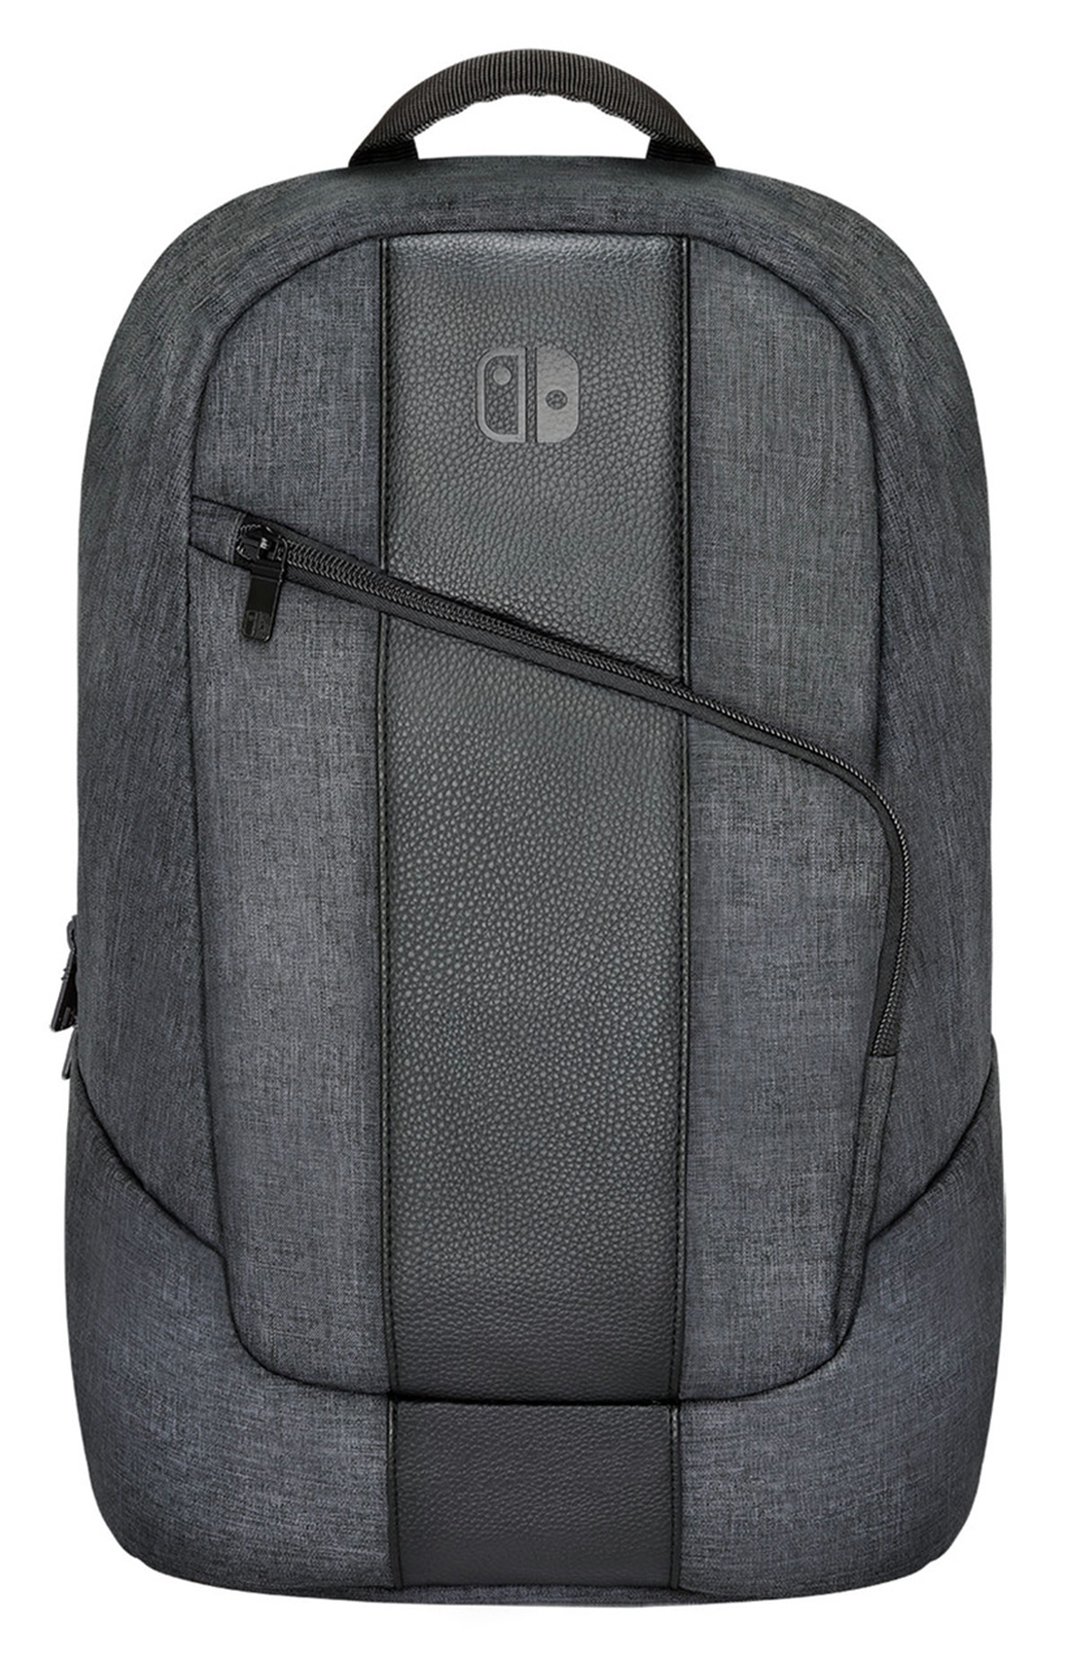 Elite Player Backpack Review